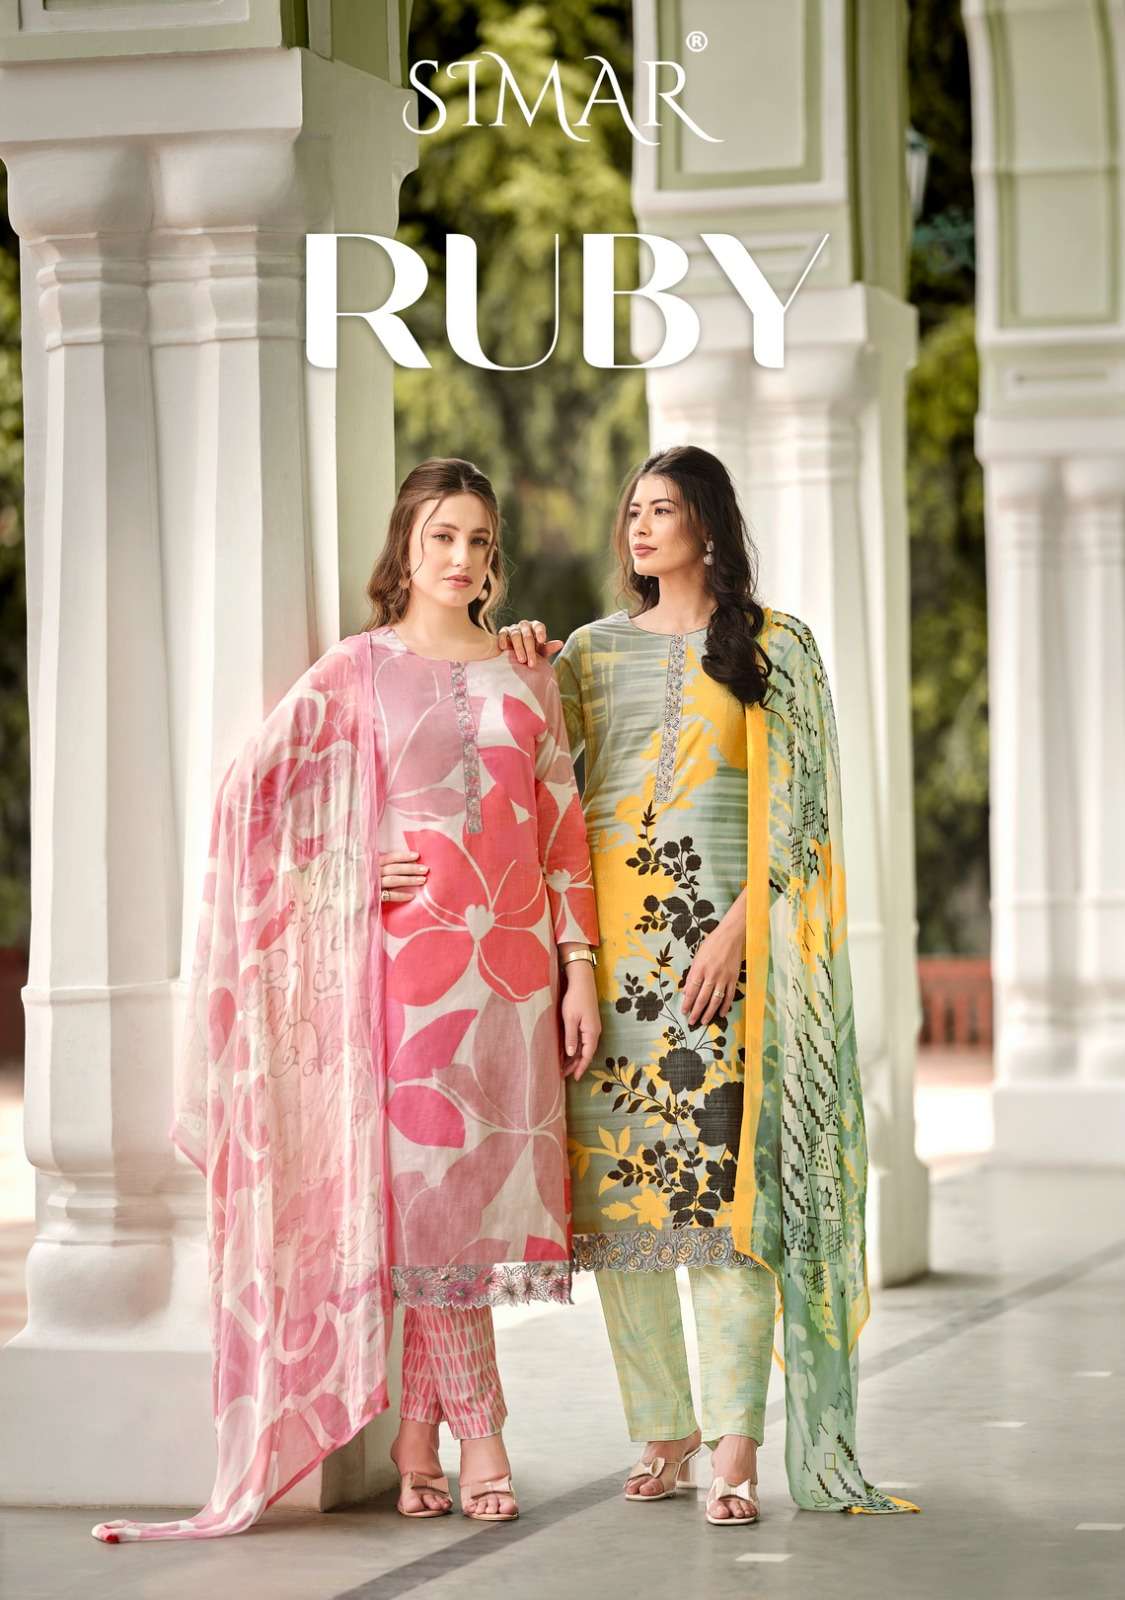 Glossy Simar Ruby New Arrivals Exclusive Cotton Dress Catalog Suppliers